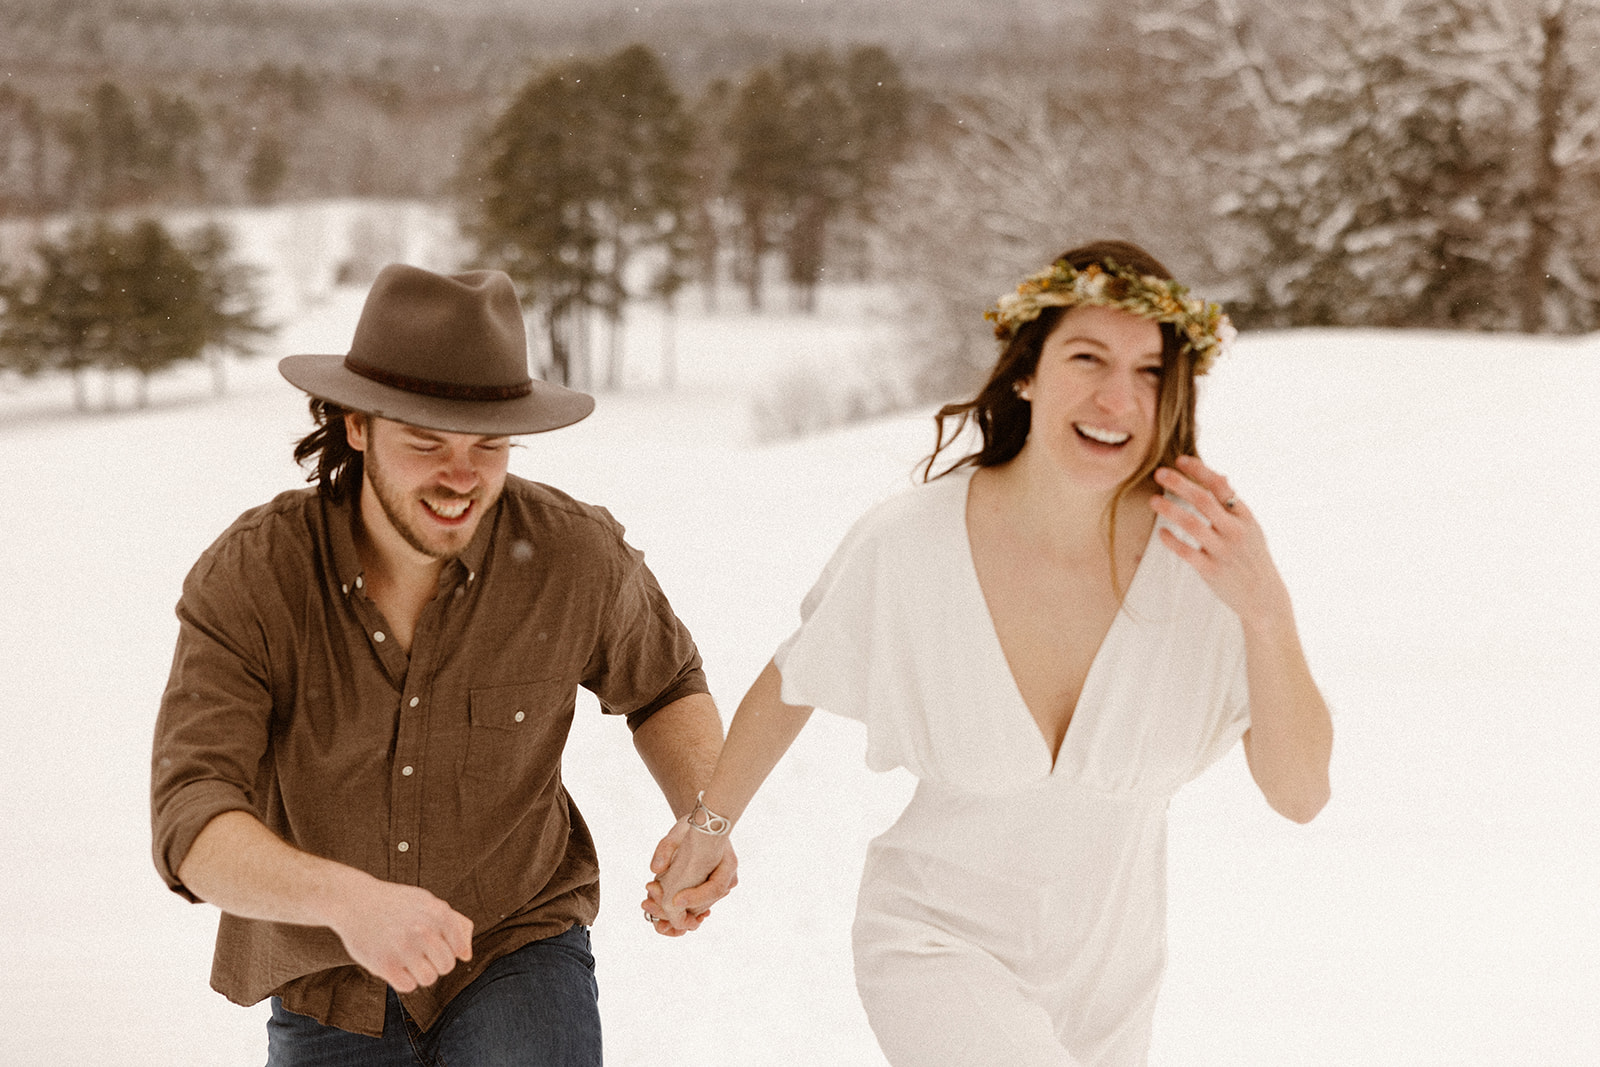 white mountains, new hampshire winter elopement 